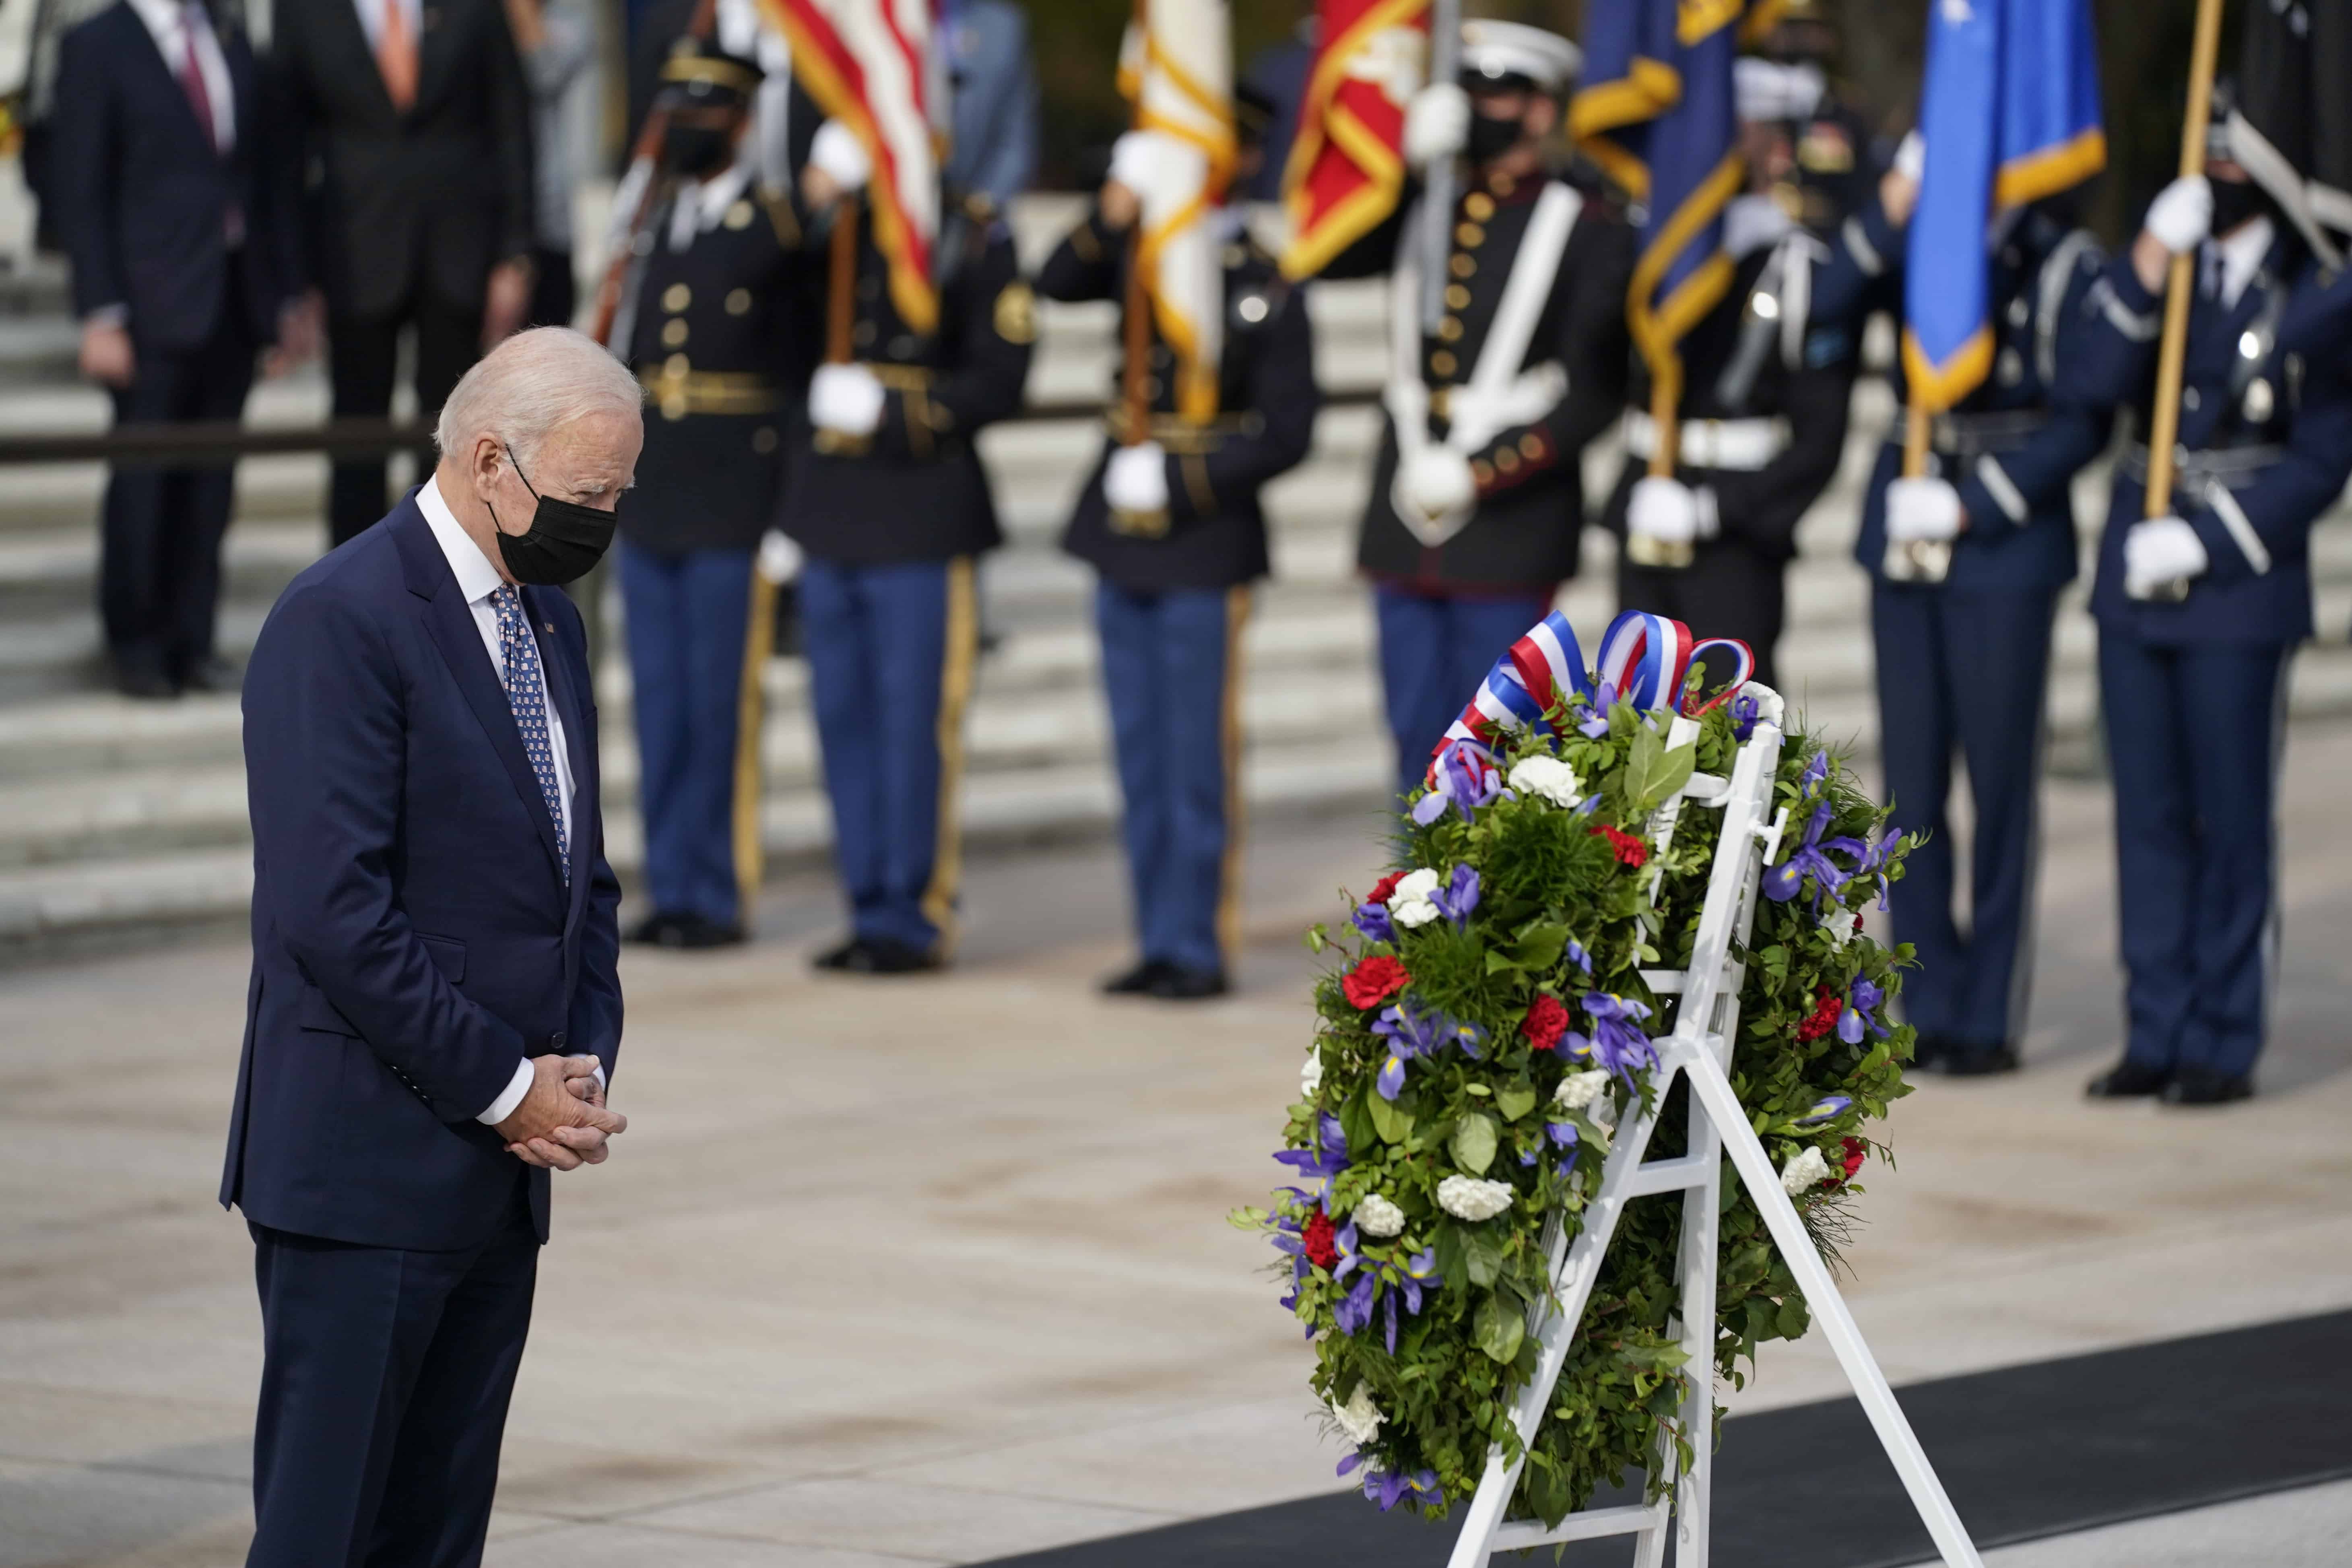 Biden Salutes Troops as ‘Spine of America’ on Veterans Day